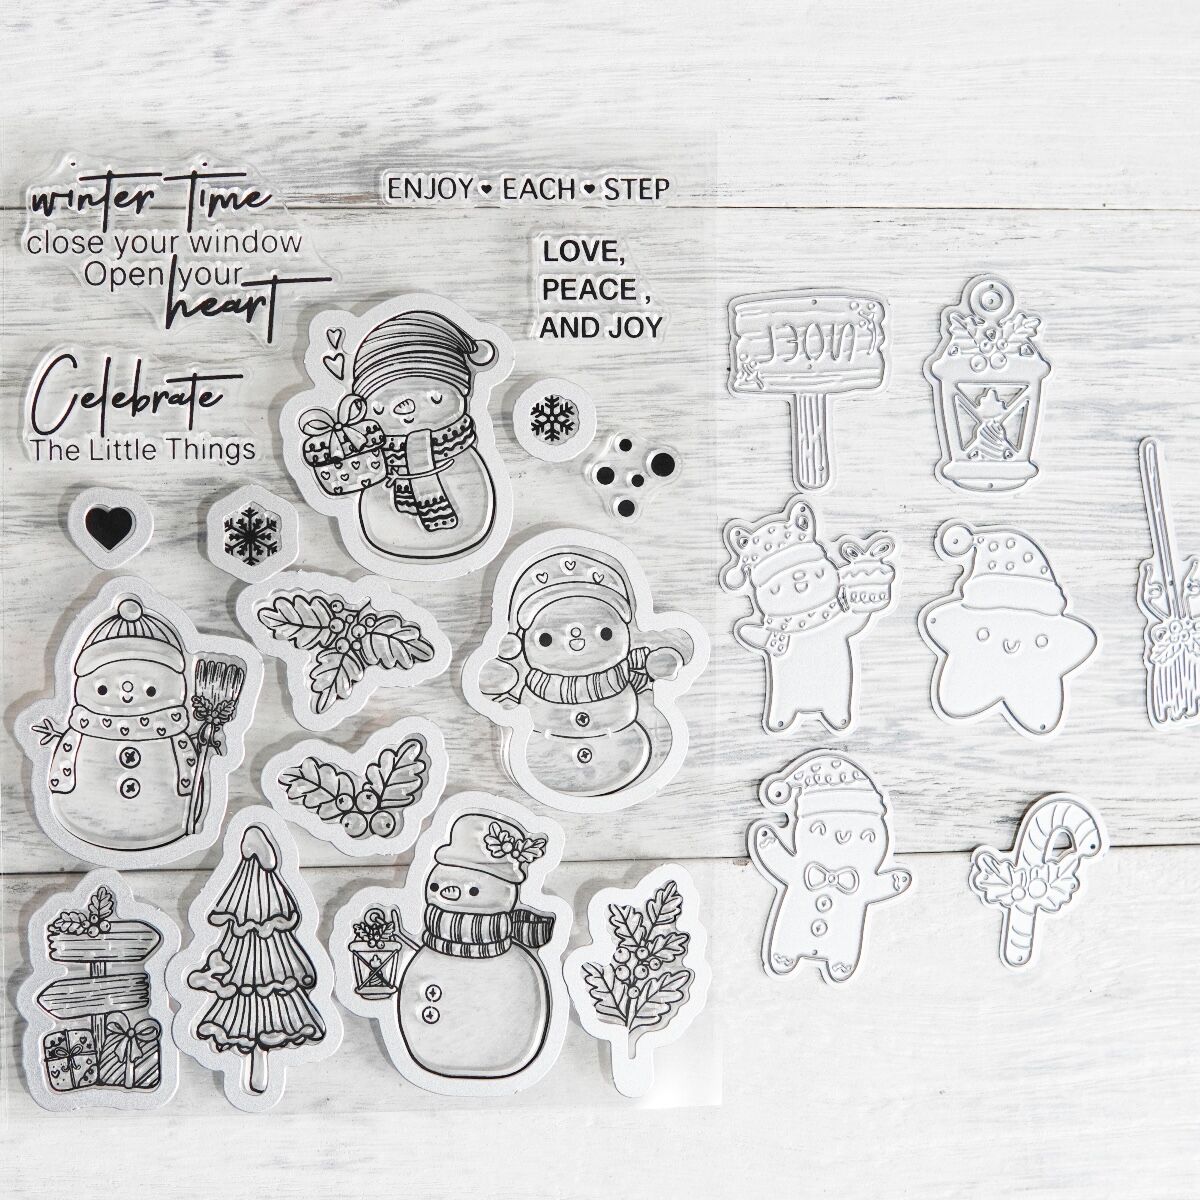 Christmas Tree Winter Snowman Cutting Dies And Stamp Set YX824-S+D